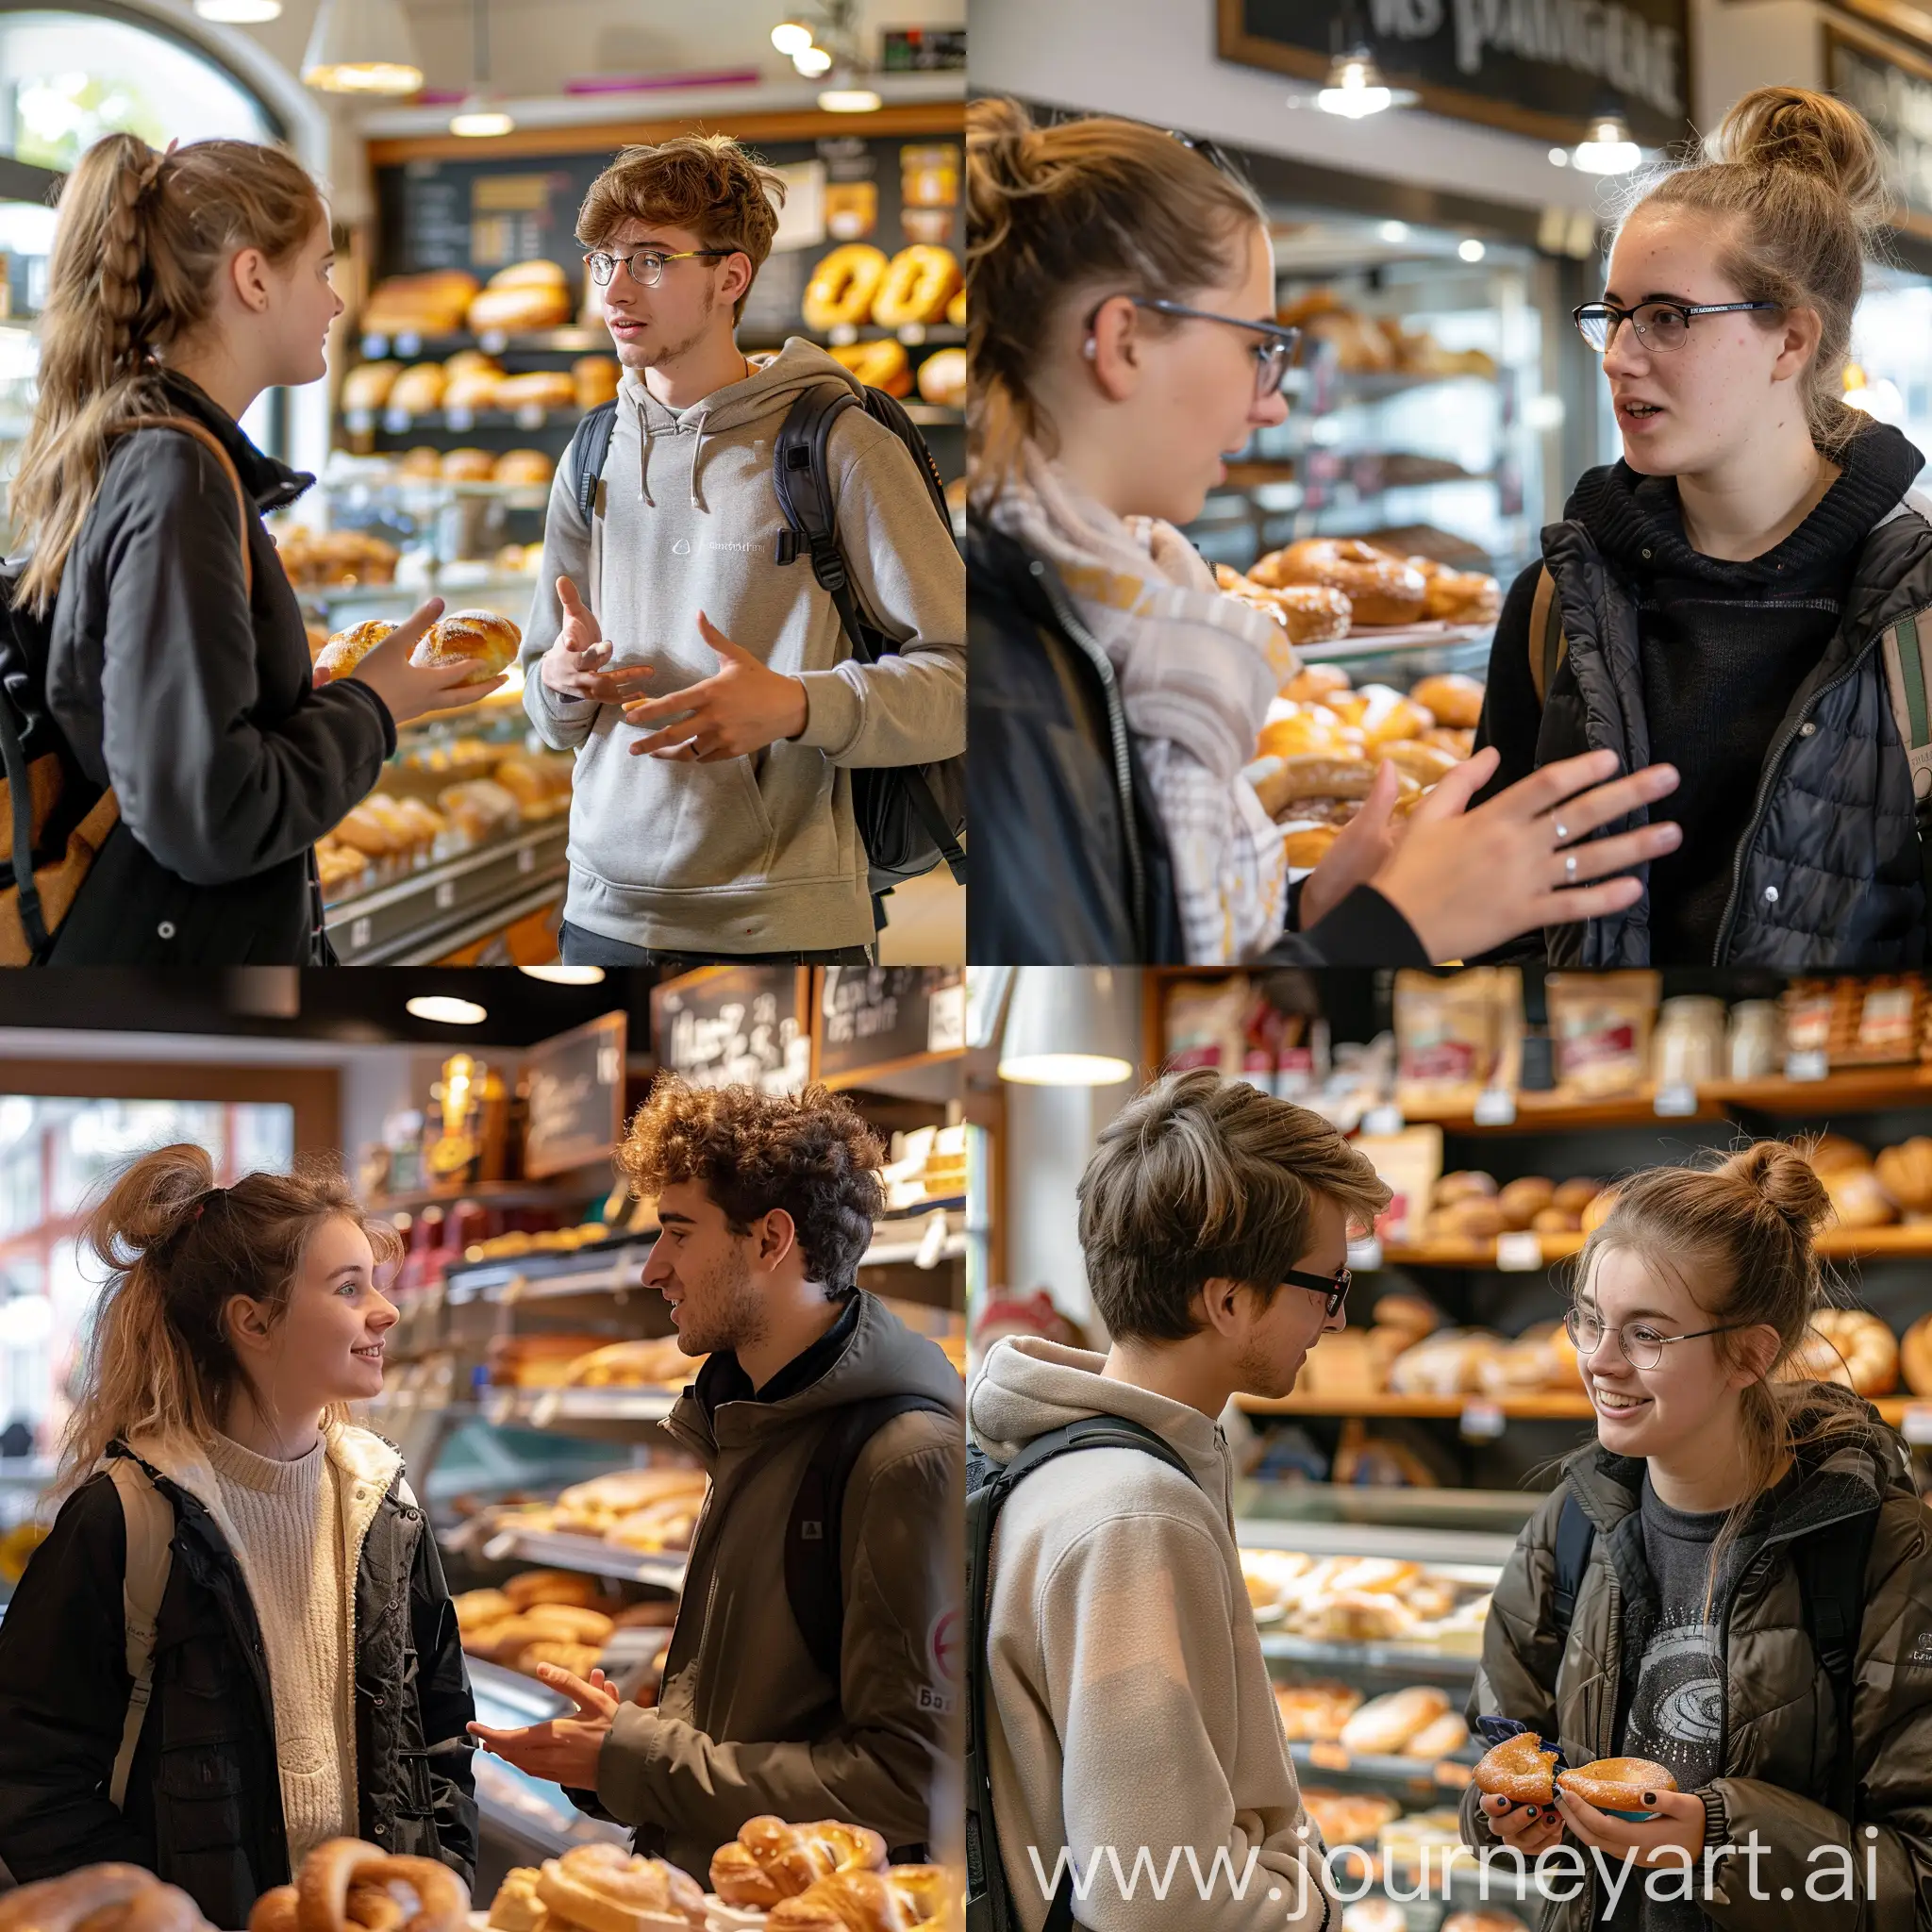 Germanian-Students-Engaging-in-Bakery-Conversation